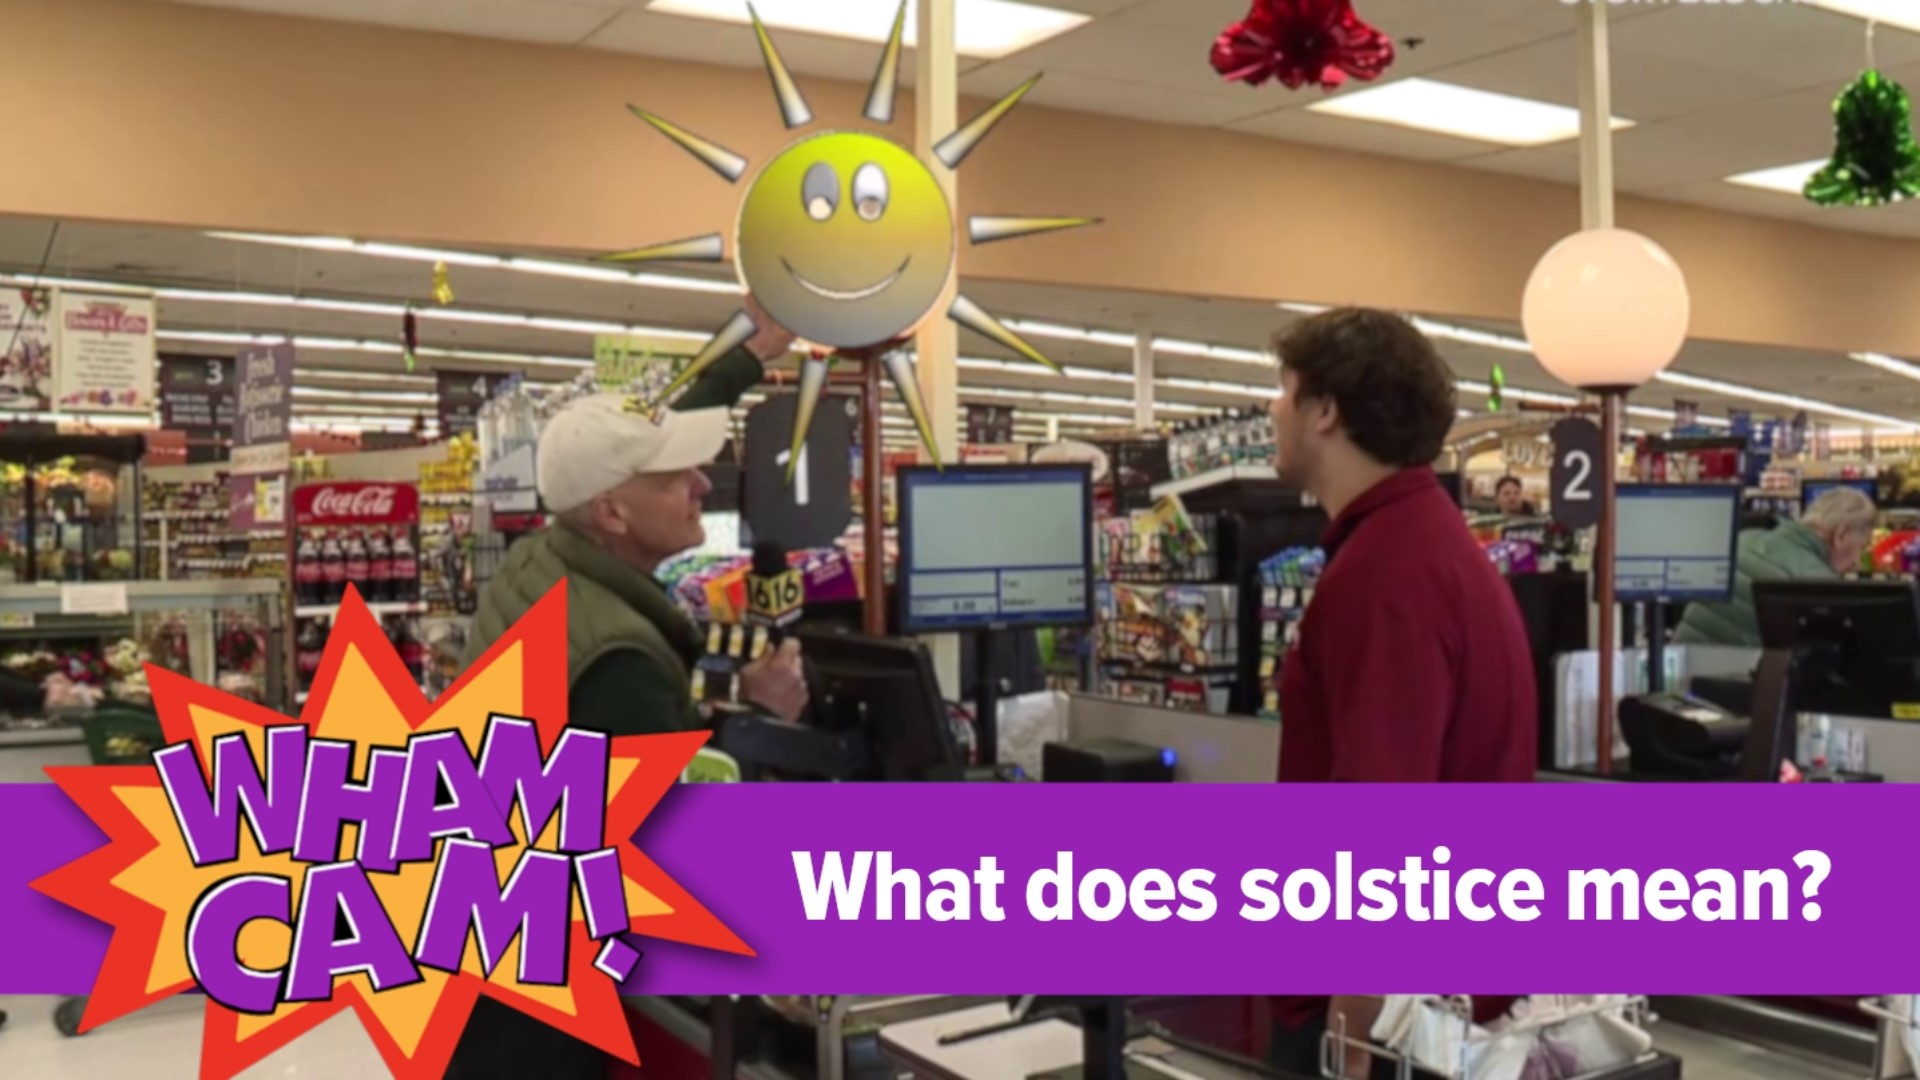 The winter solstice is here, and that has Joe wondering if people know what solstice means. He headed to Gerrity's in Clarks Summit to find out.